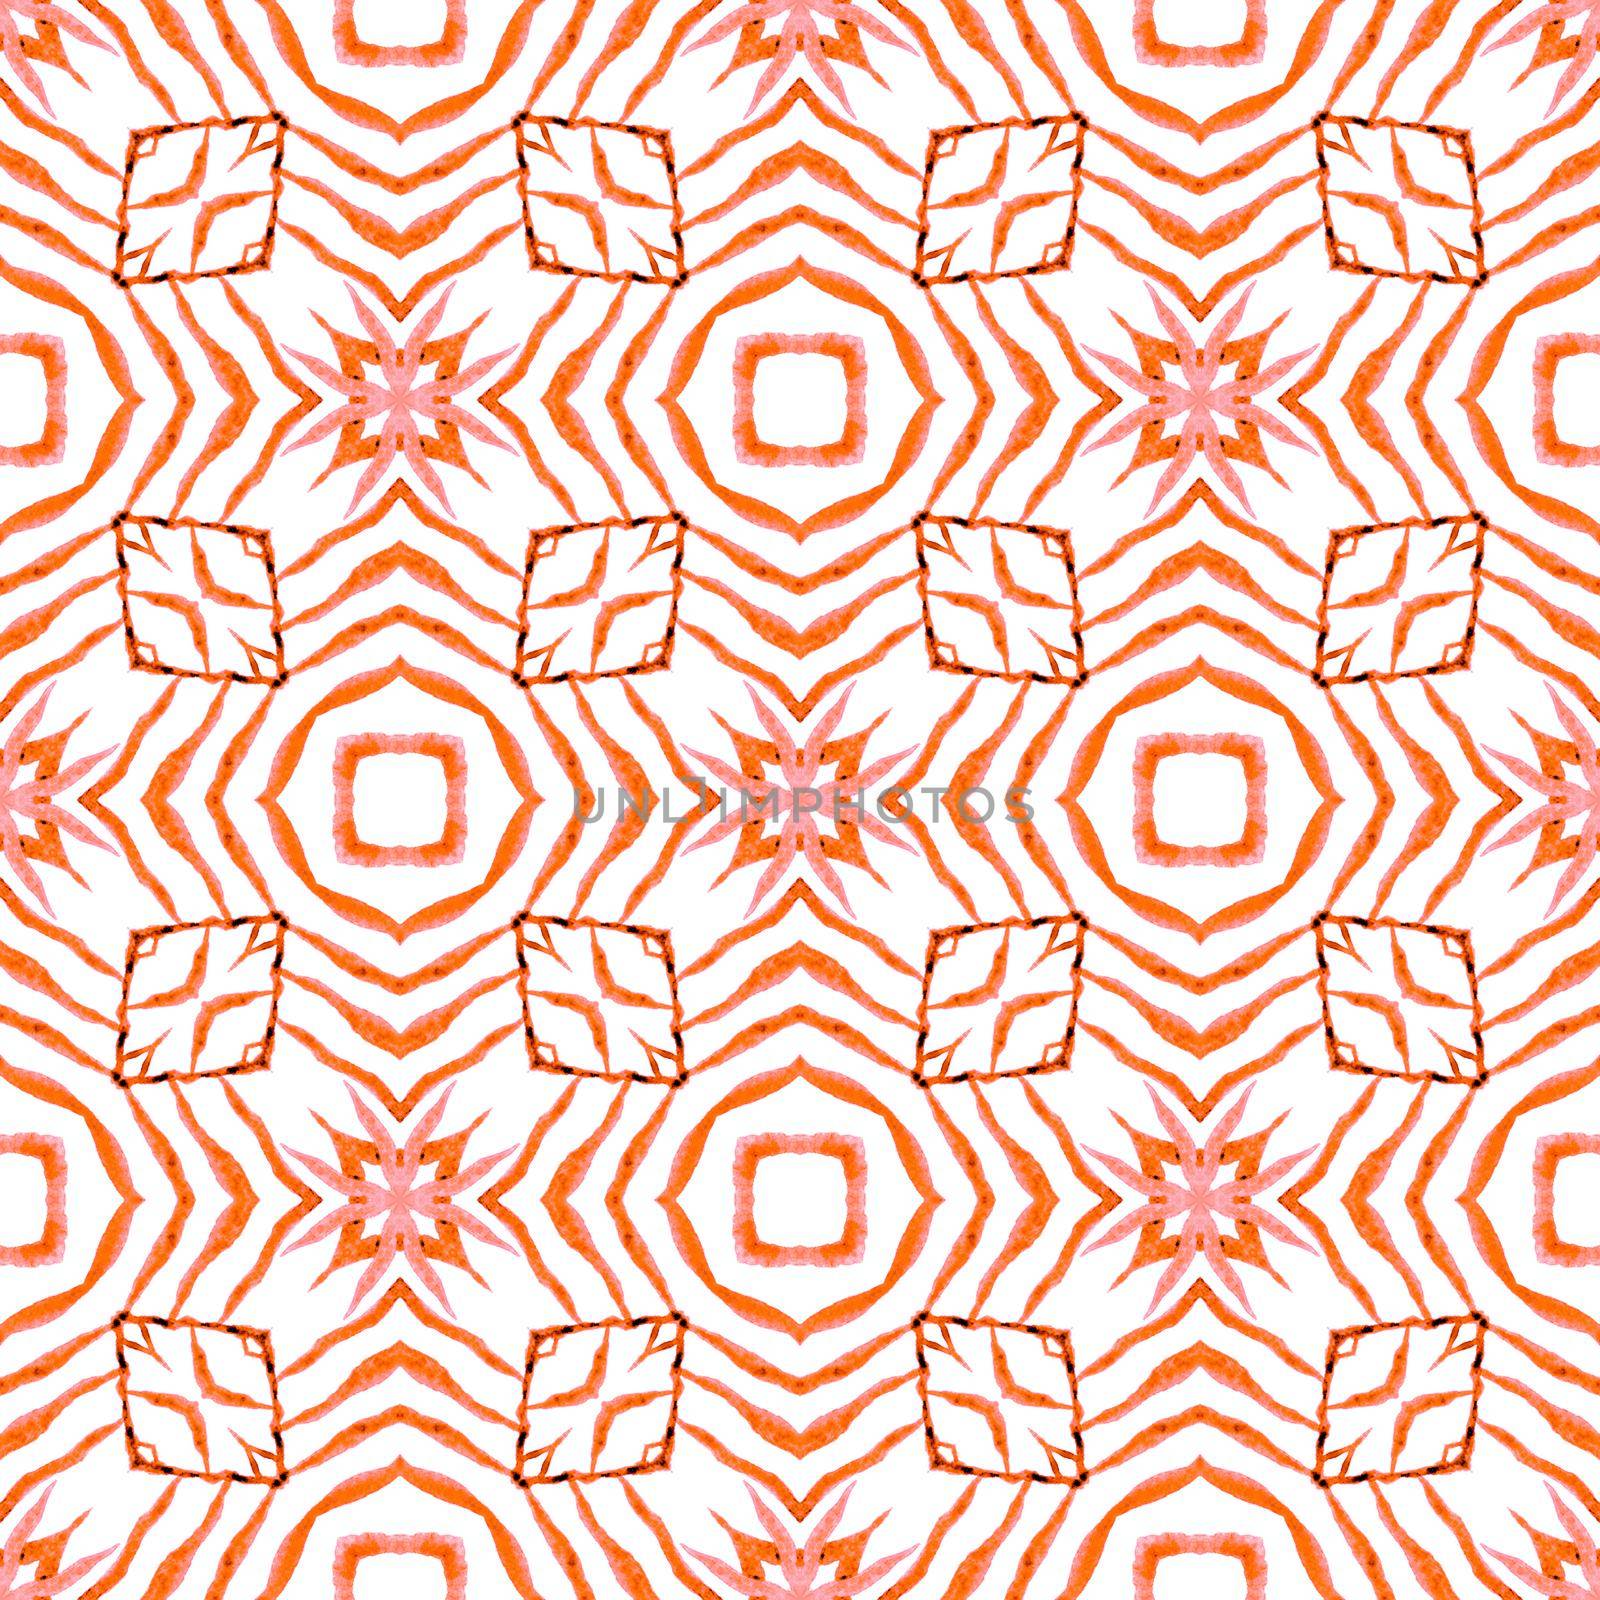 Textile ready bewitching print, swimwear fabric, wallpaper, wrapping. Orange mind-blowing boho chic summer design. Medallion seamless pattern. Watercolor medallion seamless border.